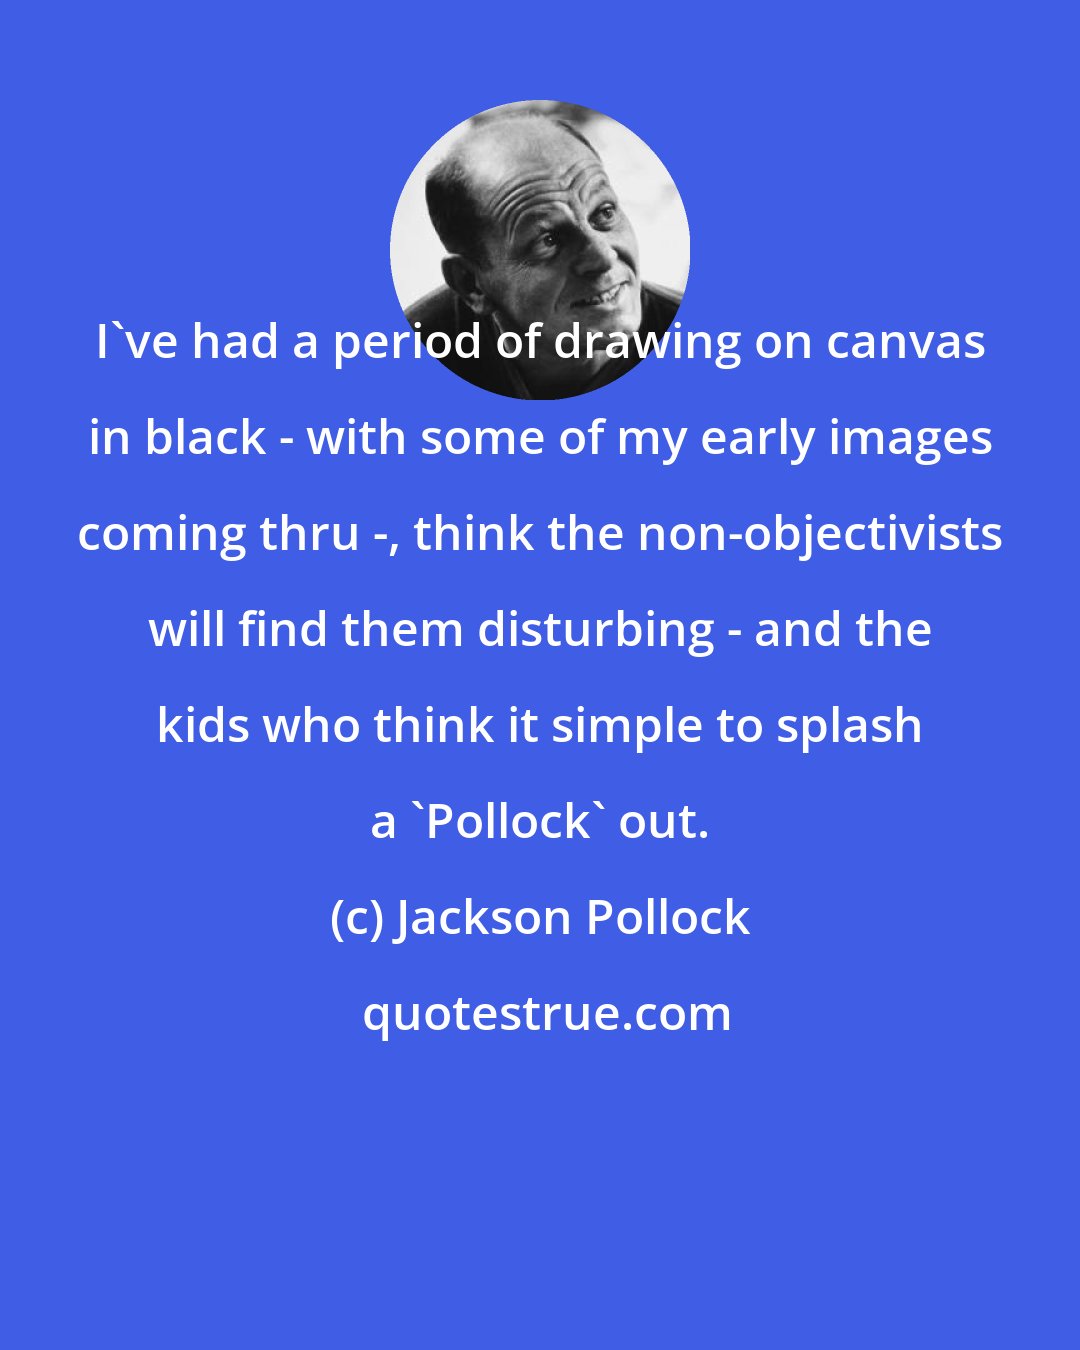 Jackson Pollock: I've had a period of drawing on canvas in black - with some of my early images coming thru -, think the non-objectivists will find them disturbing - and the kids who think it simple to splash a 'Pollock' out.